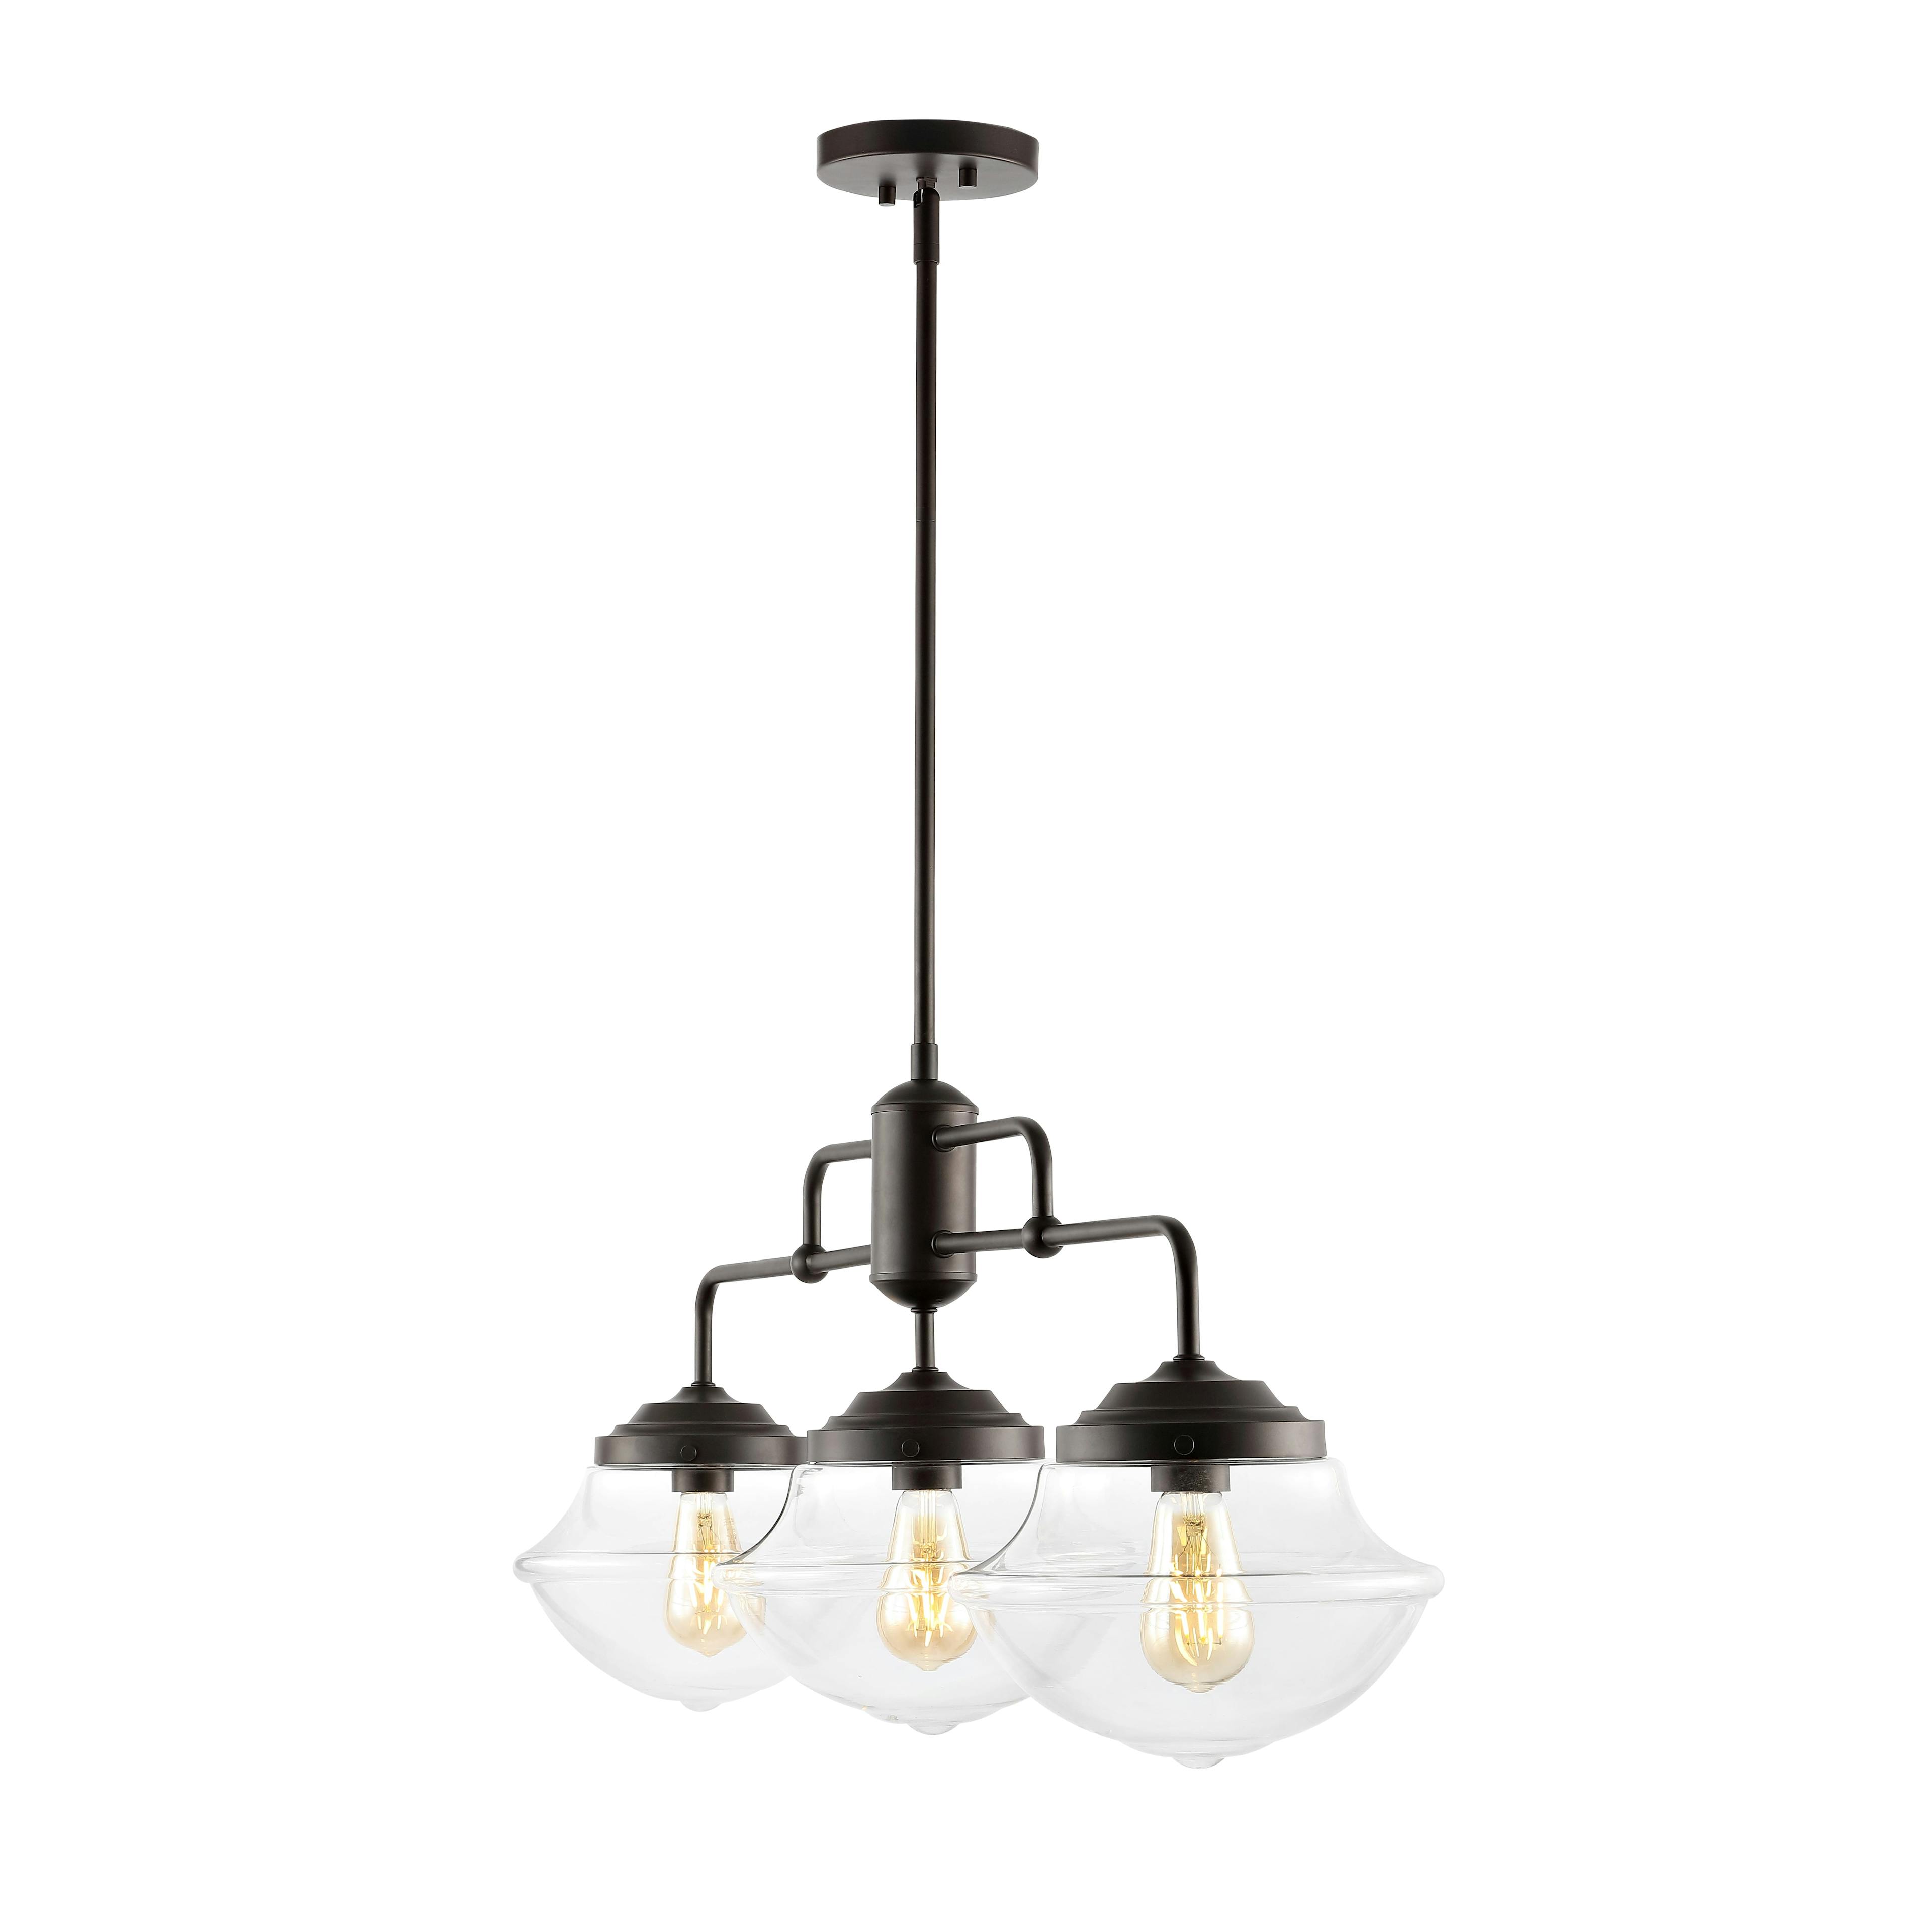 Avery 37.5" Oil-Rubbed Bronze 3-Light Industrial Rustic LED Linear Pendant